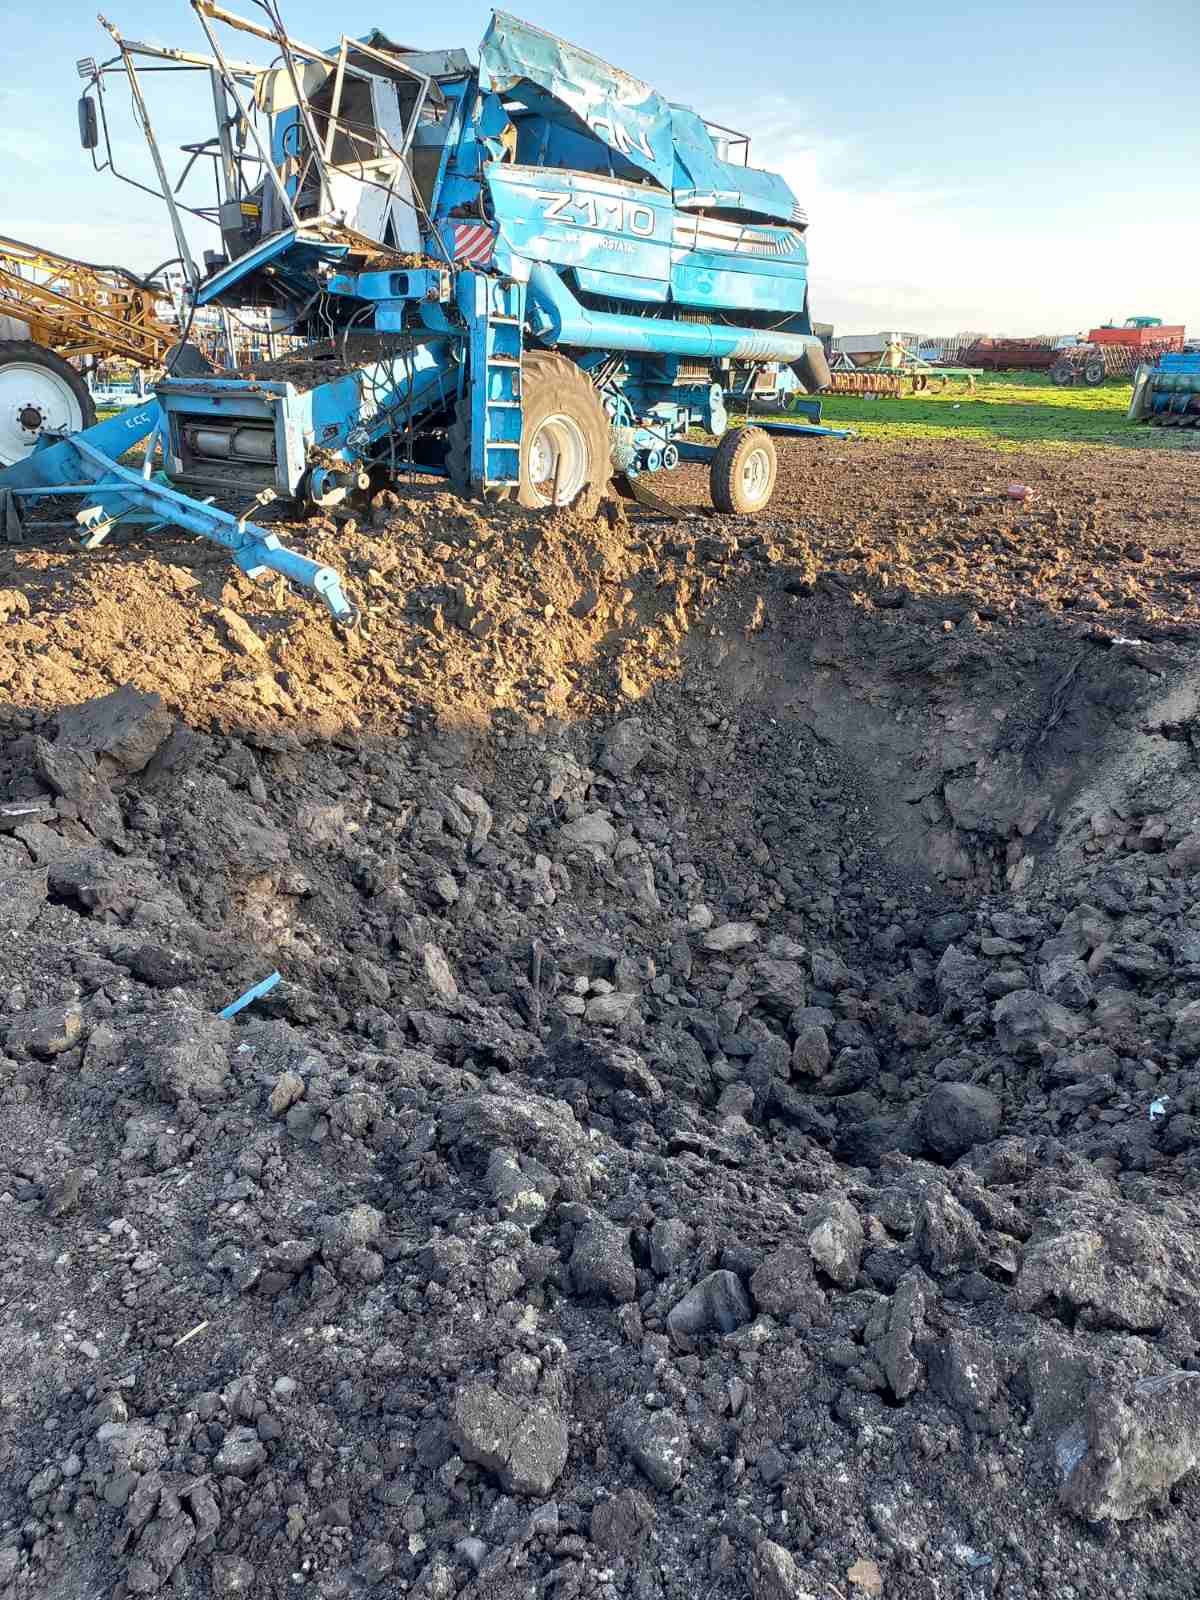 Damaged agricultural machinery. Photo provided by community management